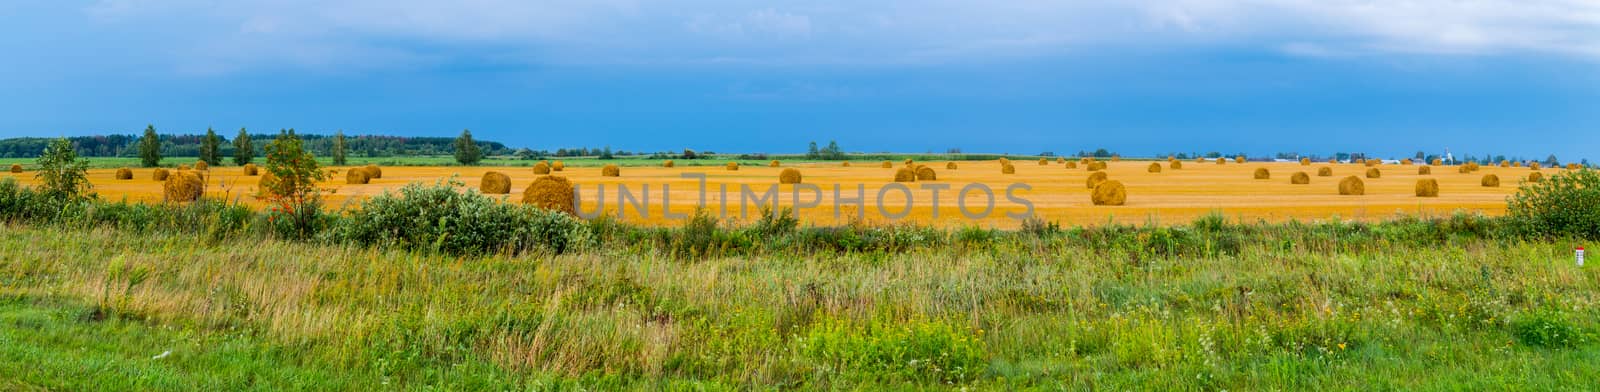 Rags of mown hay in the middle of the endless golden field against the blue sky by Adamchuk